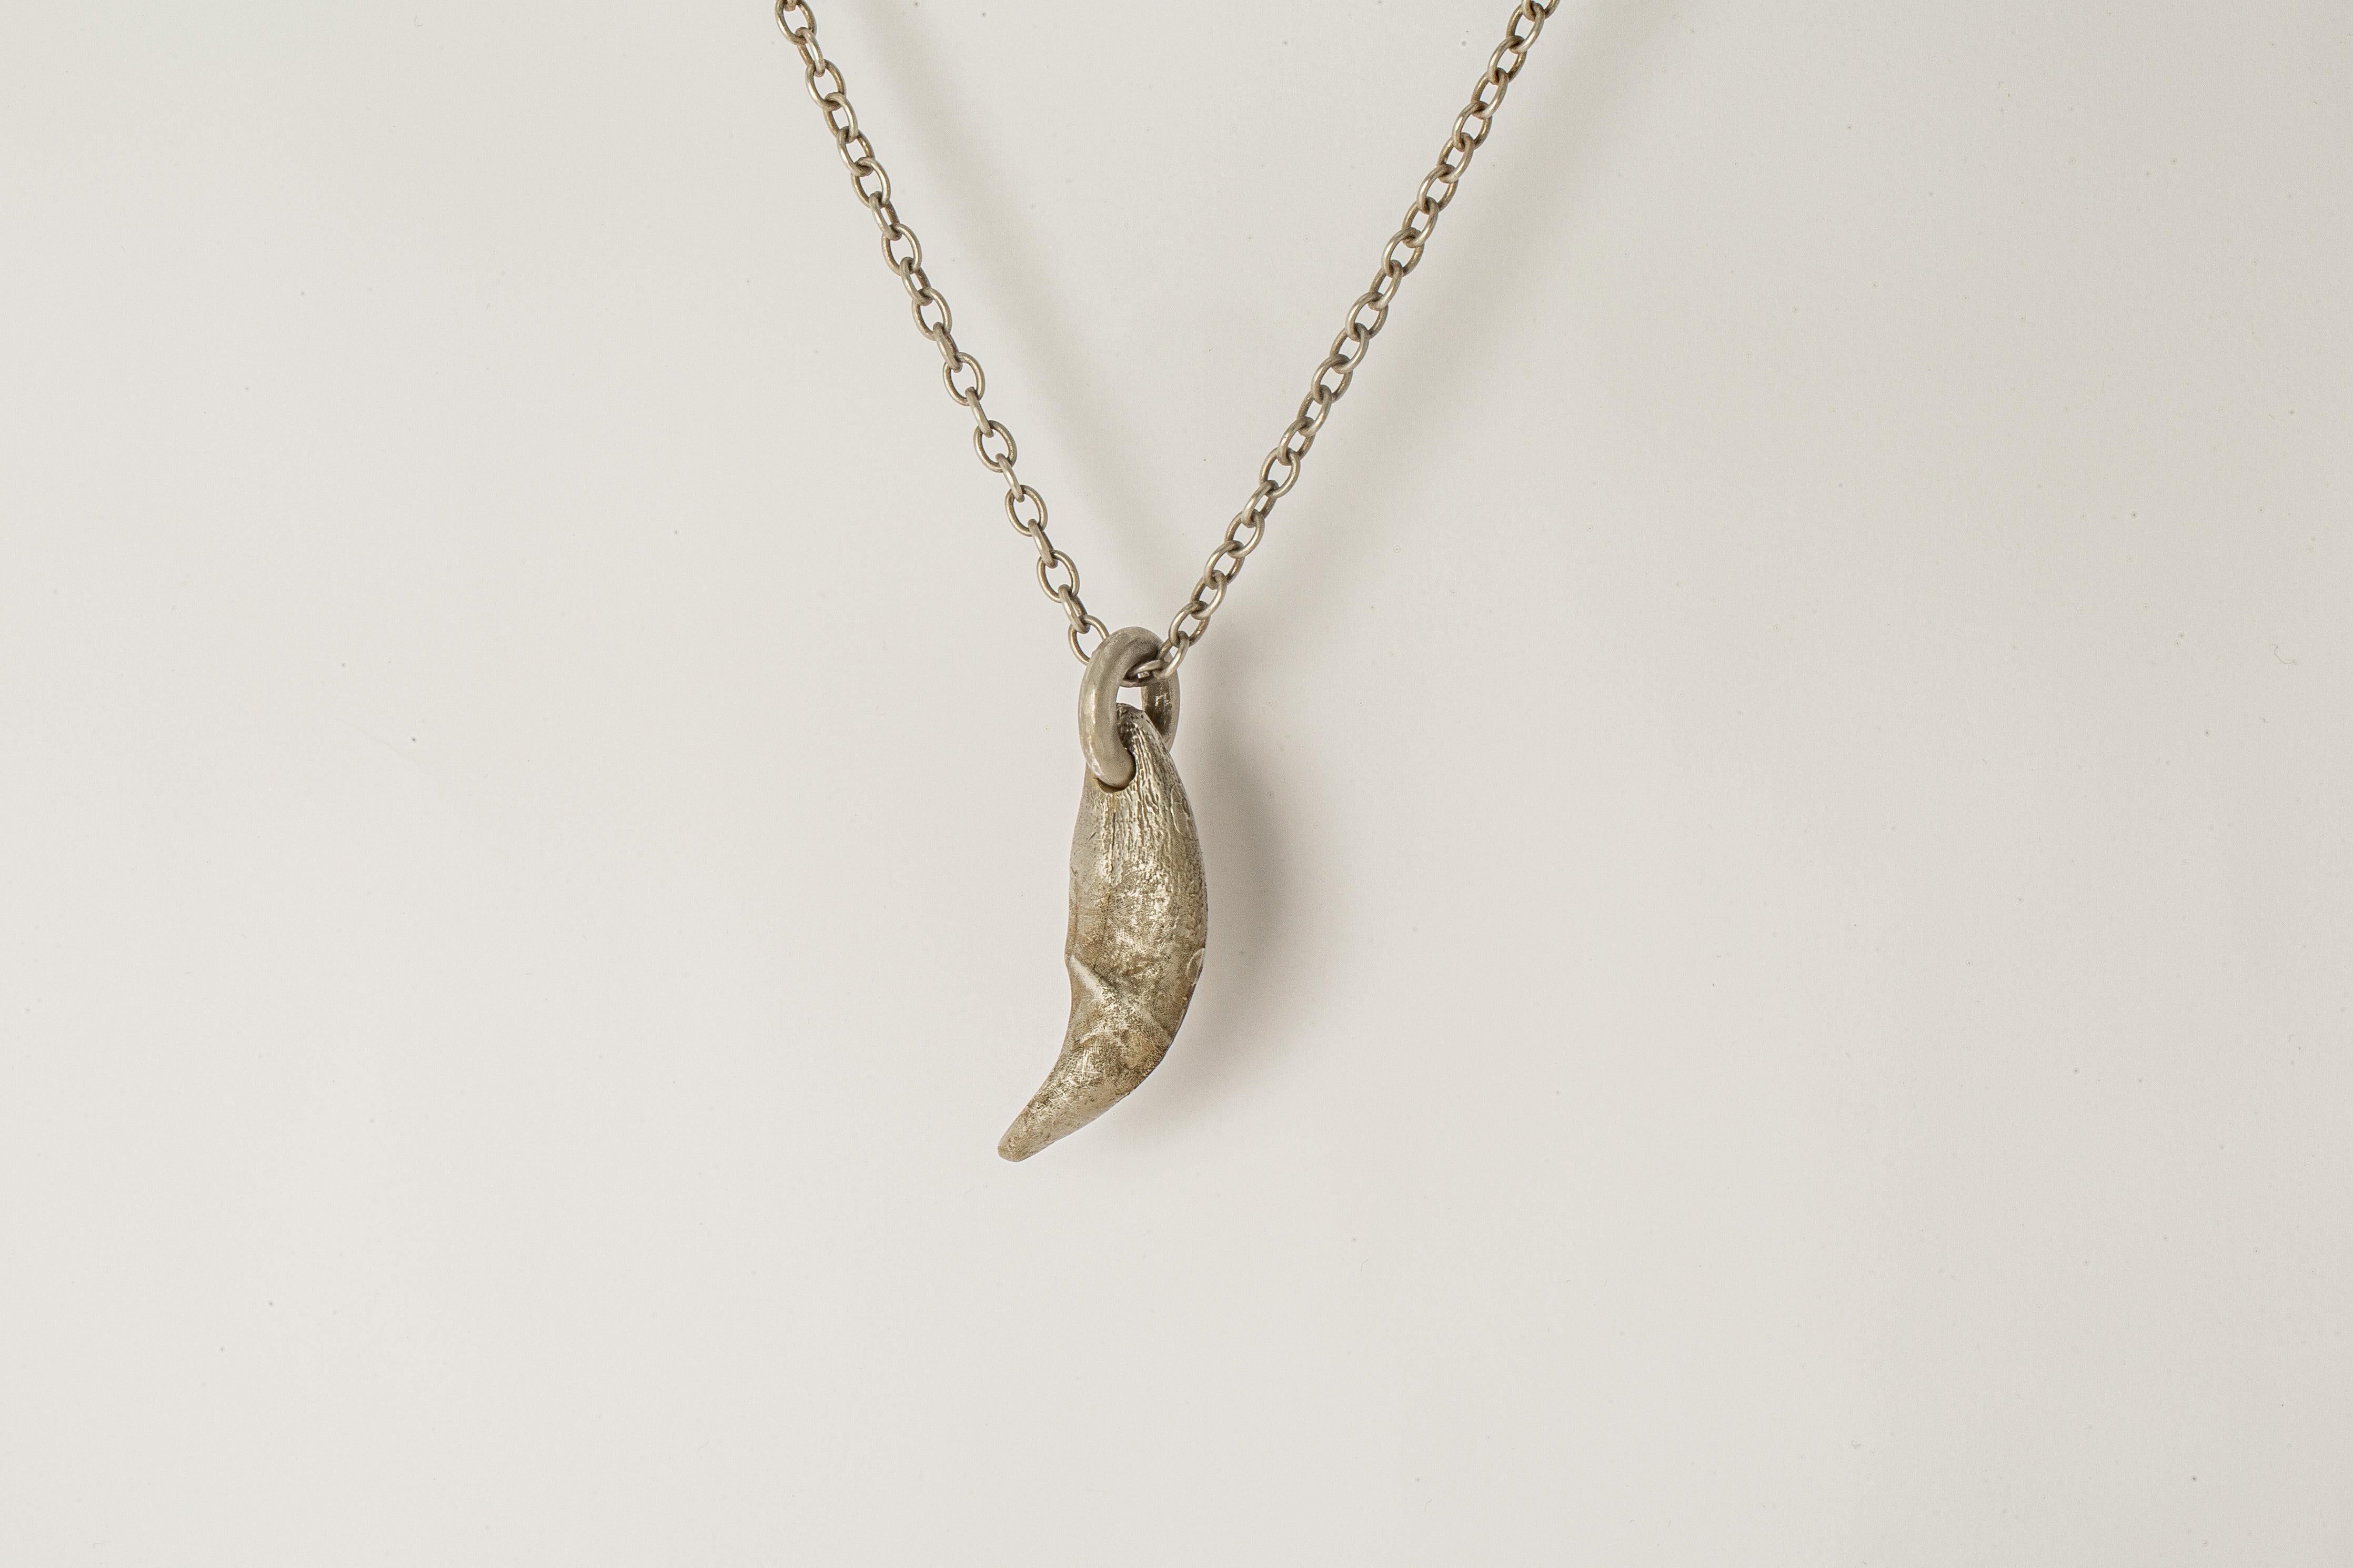 Pendant necklace in the shape of a bear tooth in brass, it comes on a 74cm sterling silver chain. Brass substrate is electroplated with silver and then dipped into acid to create the subtly destroyed surface. This item is made with deep respect to